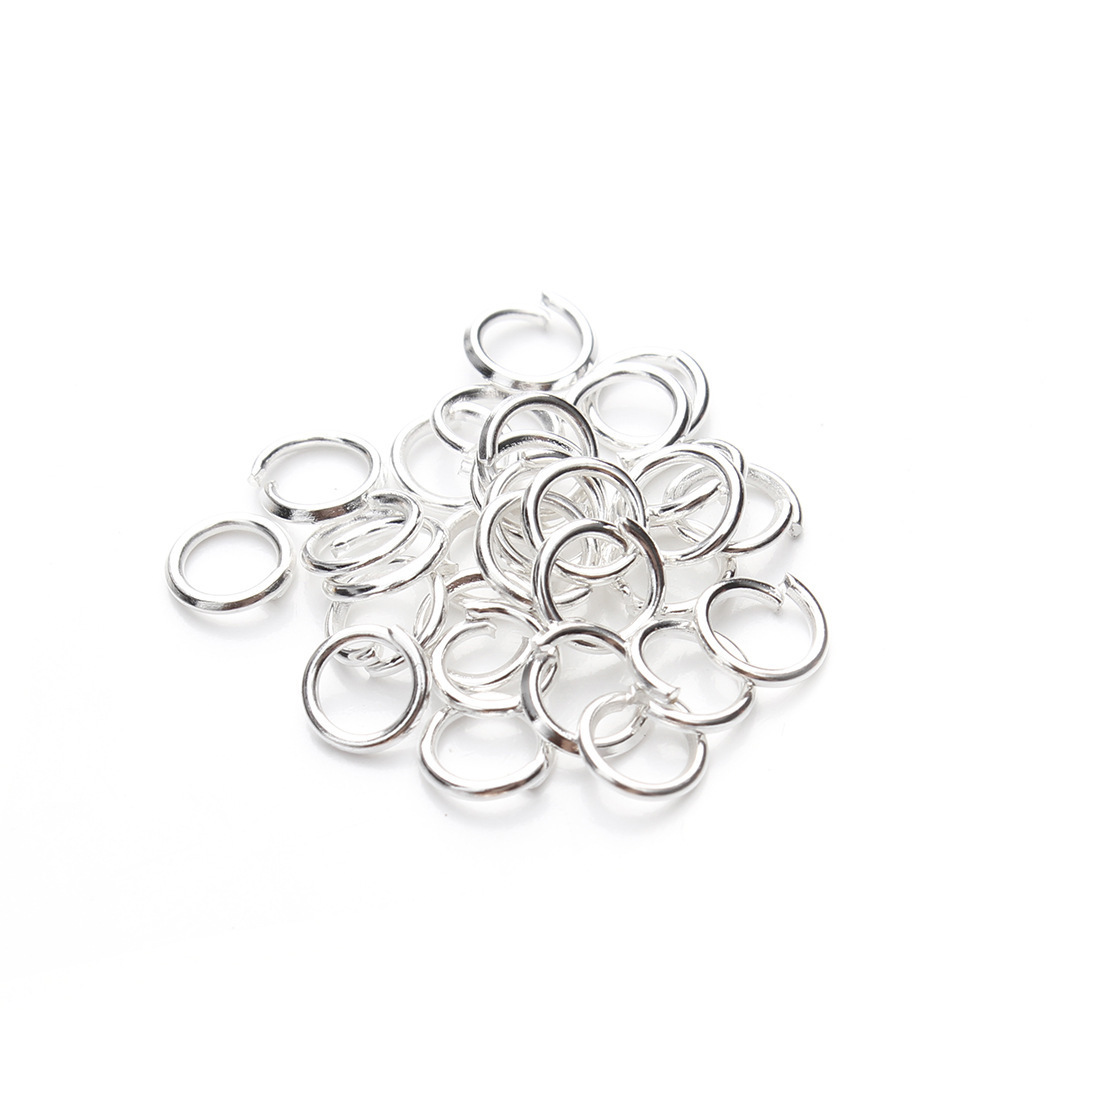 Silver outer diameter 5mm